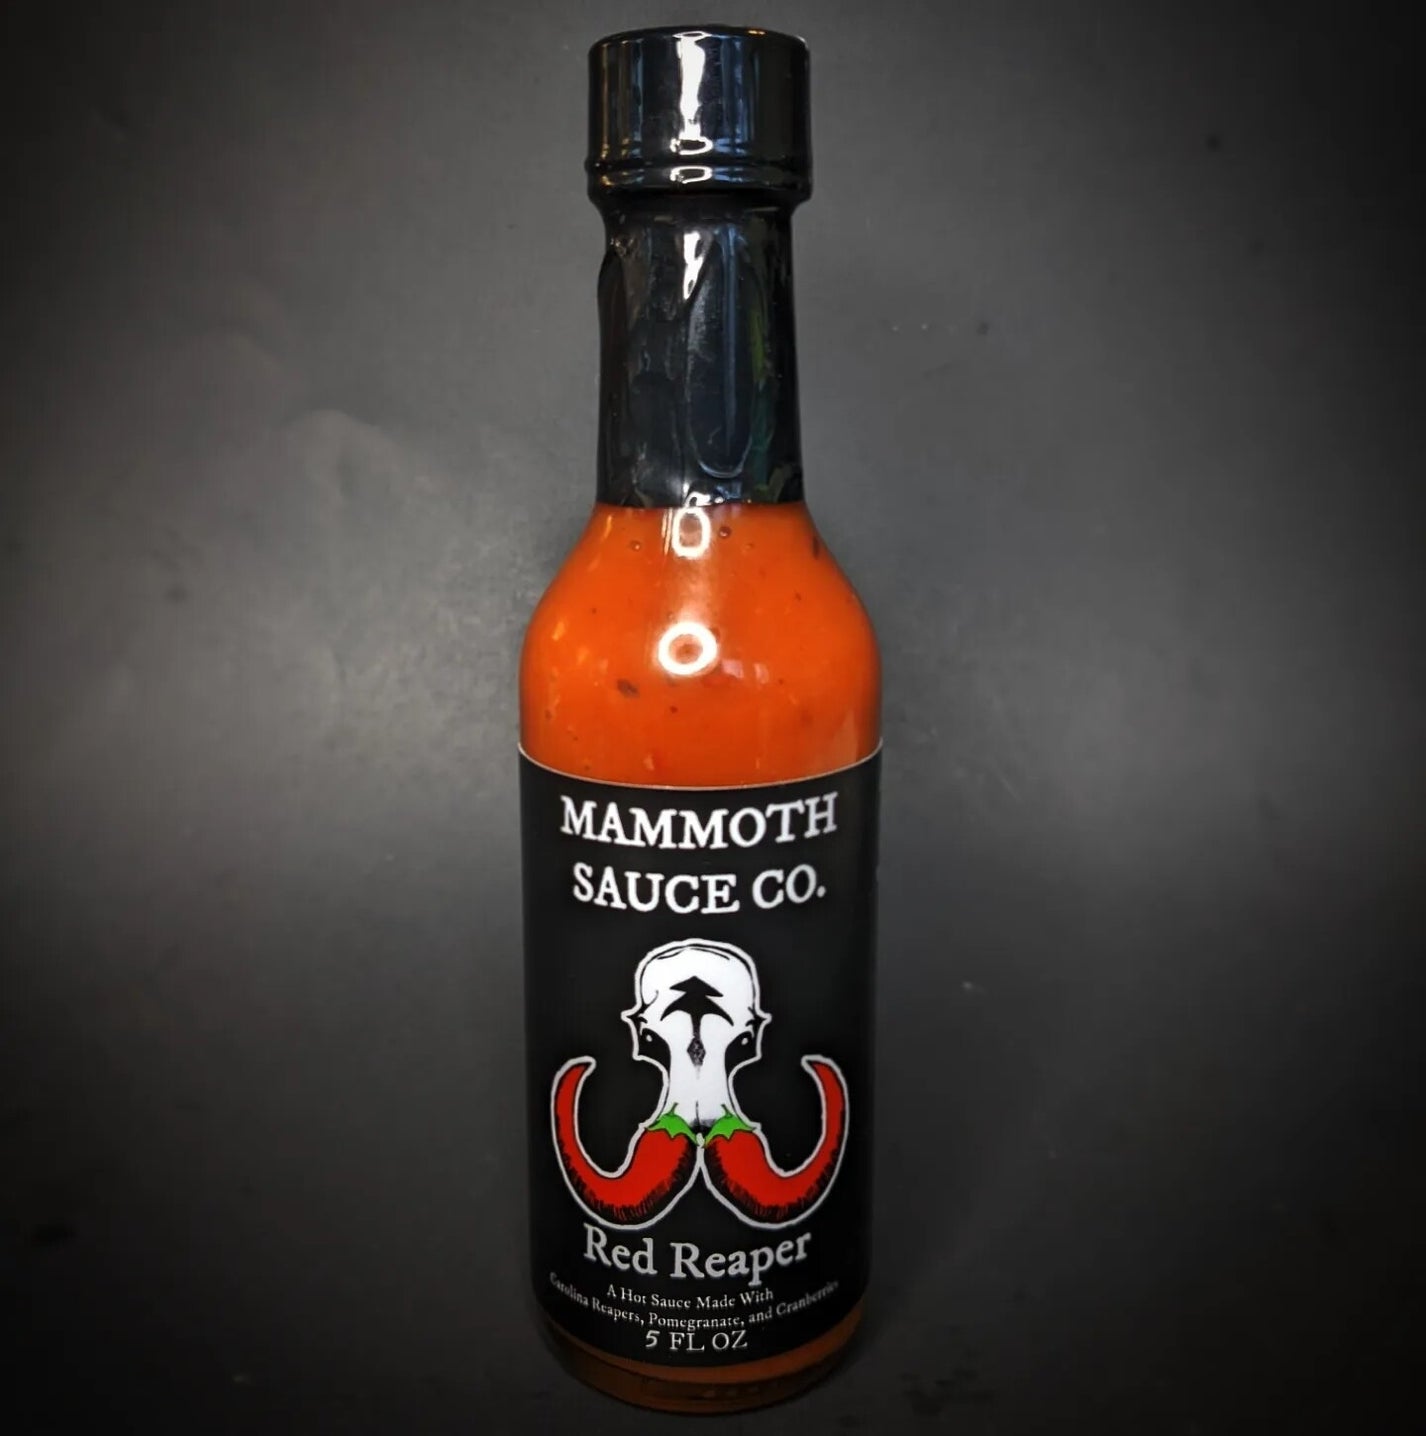 Red Reaper Hot Sauce – Mammoth Sauce Co.